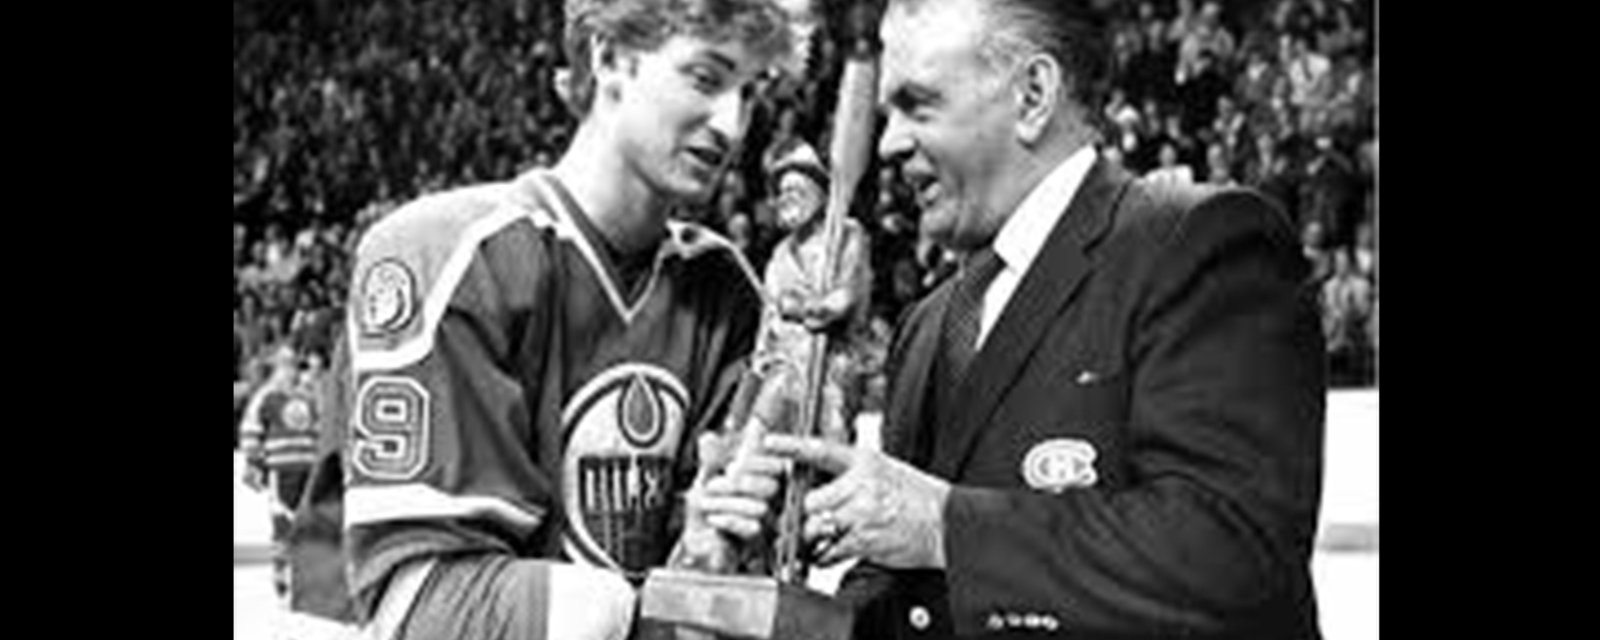 Gretzky treasures gift given to him by Rocket Richard